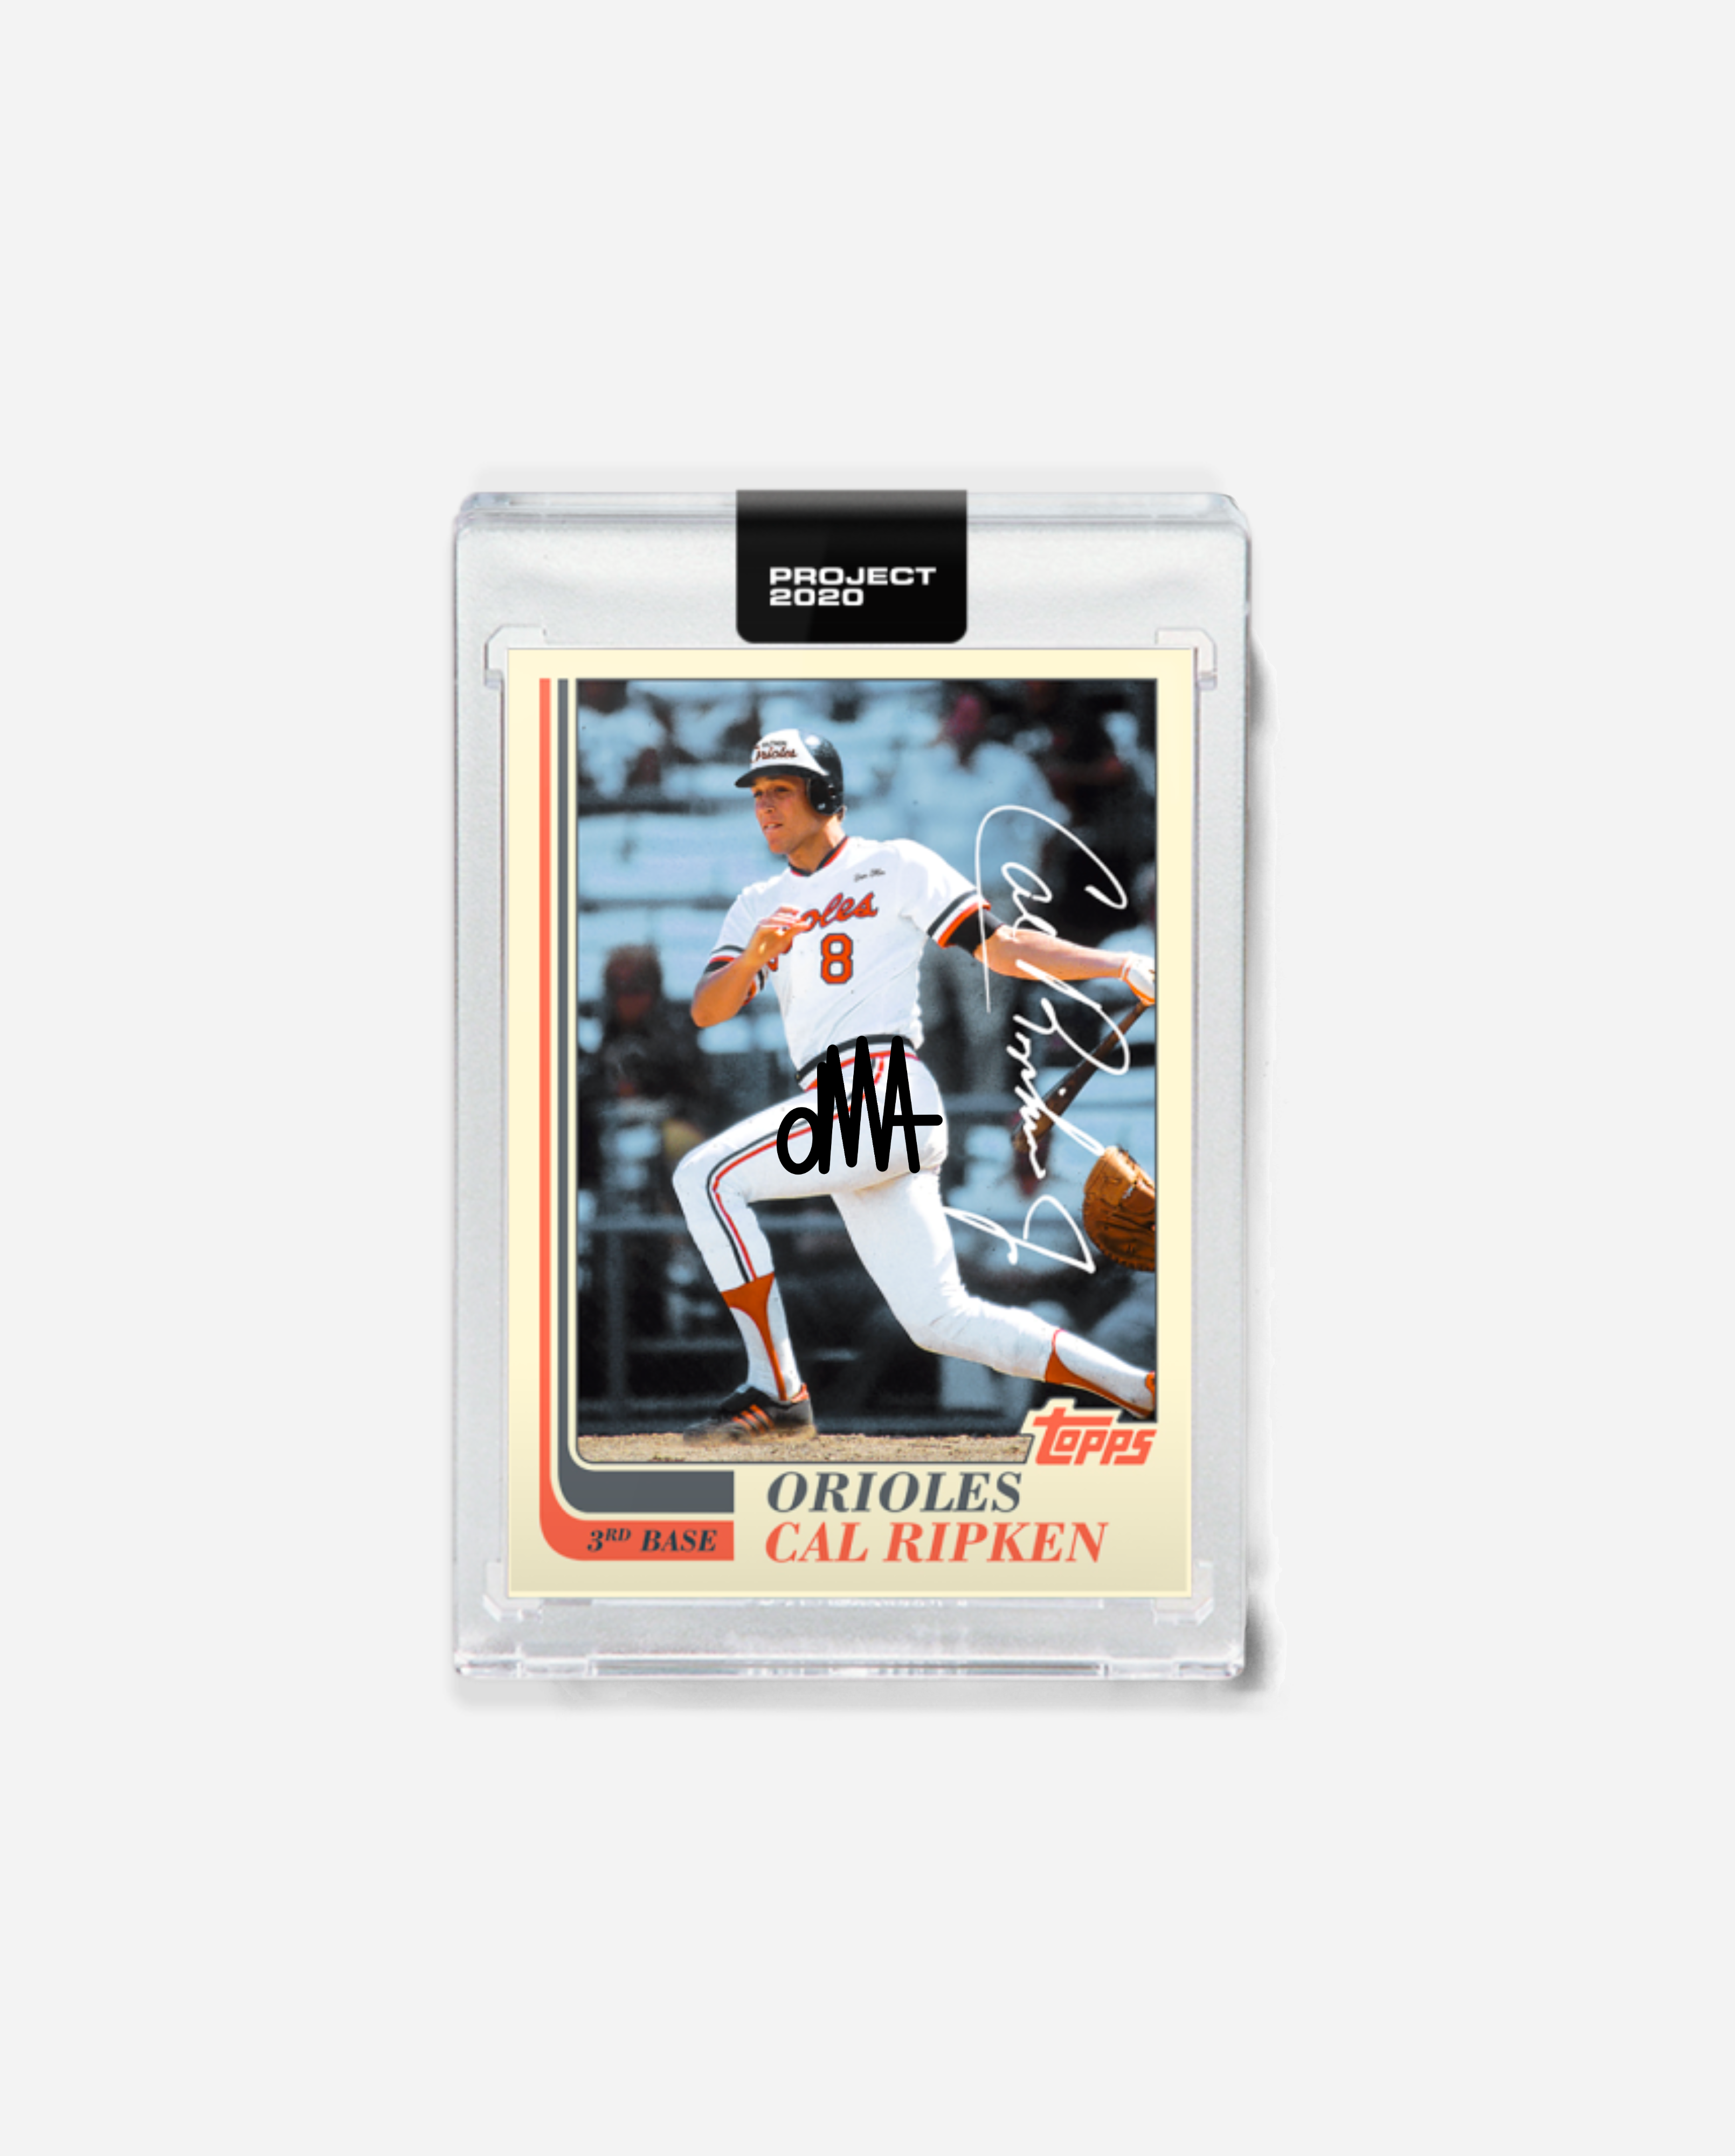 Cal Ripken, Jr. x oMA x Topps Project 2020 Autographed Card